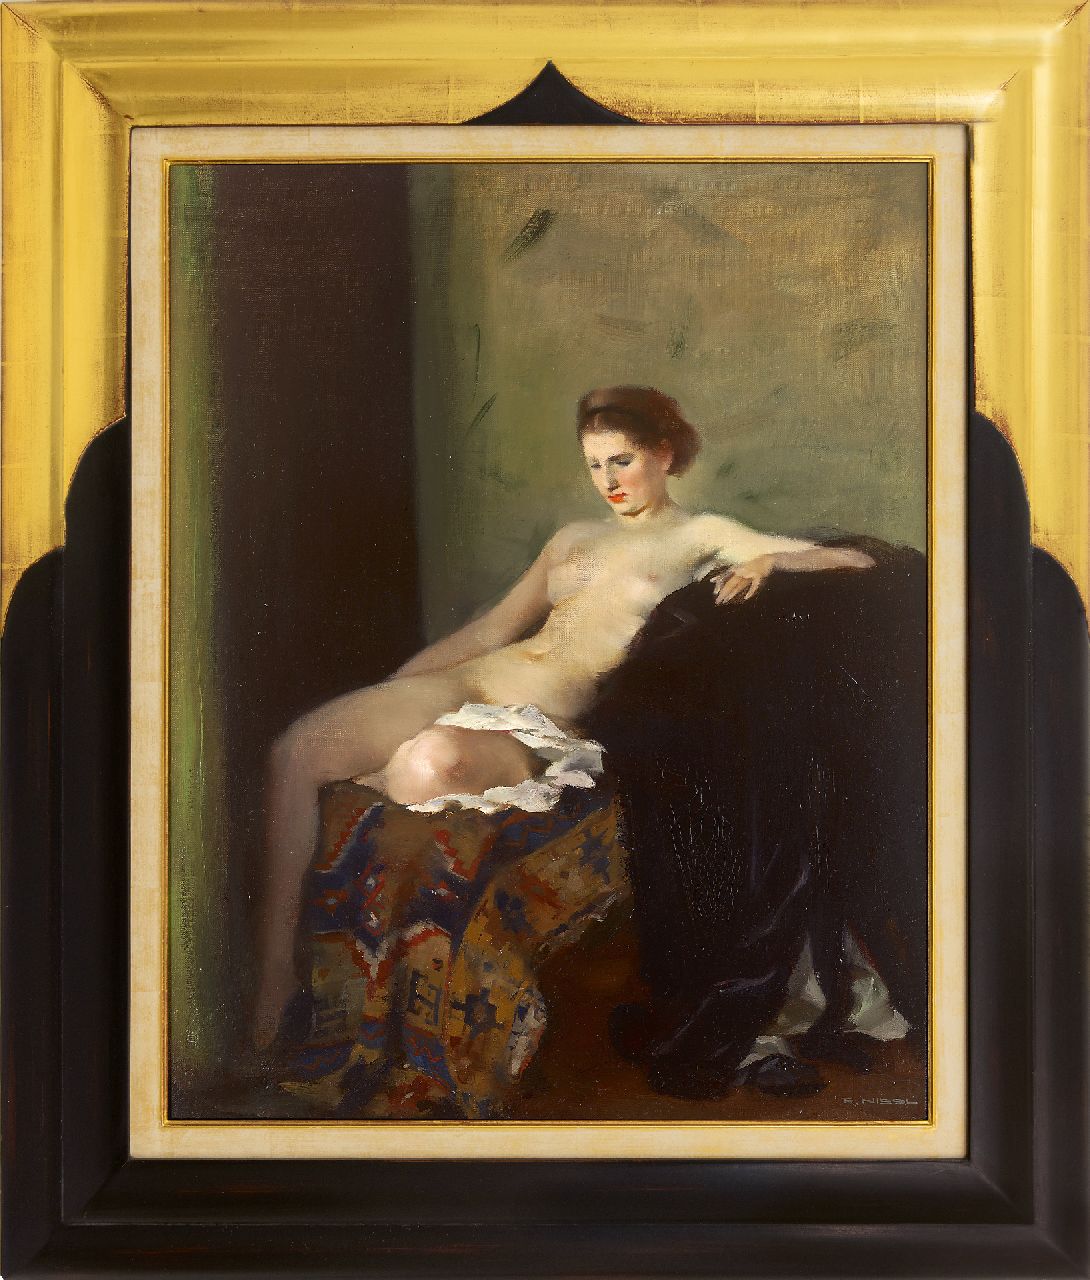 Nissl R.  | Rudolf Nissl, Seated nude on Persian rug, oil on canvas 72.3 x 57.7 cm, signed l.r.